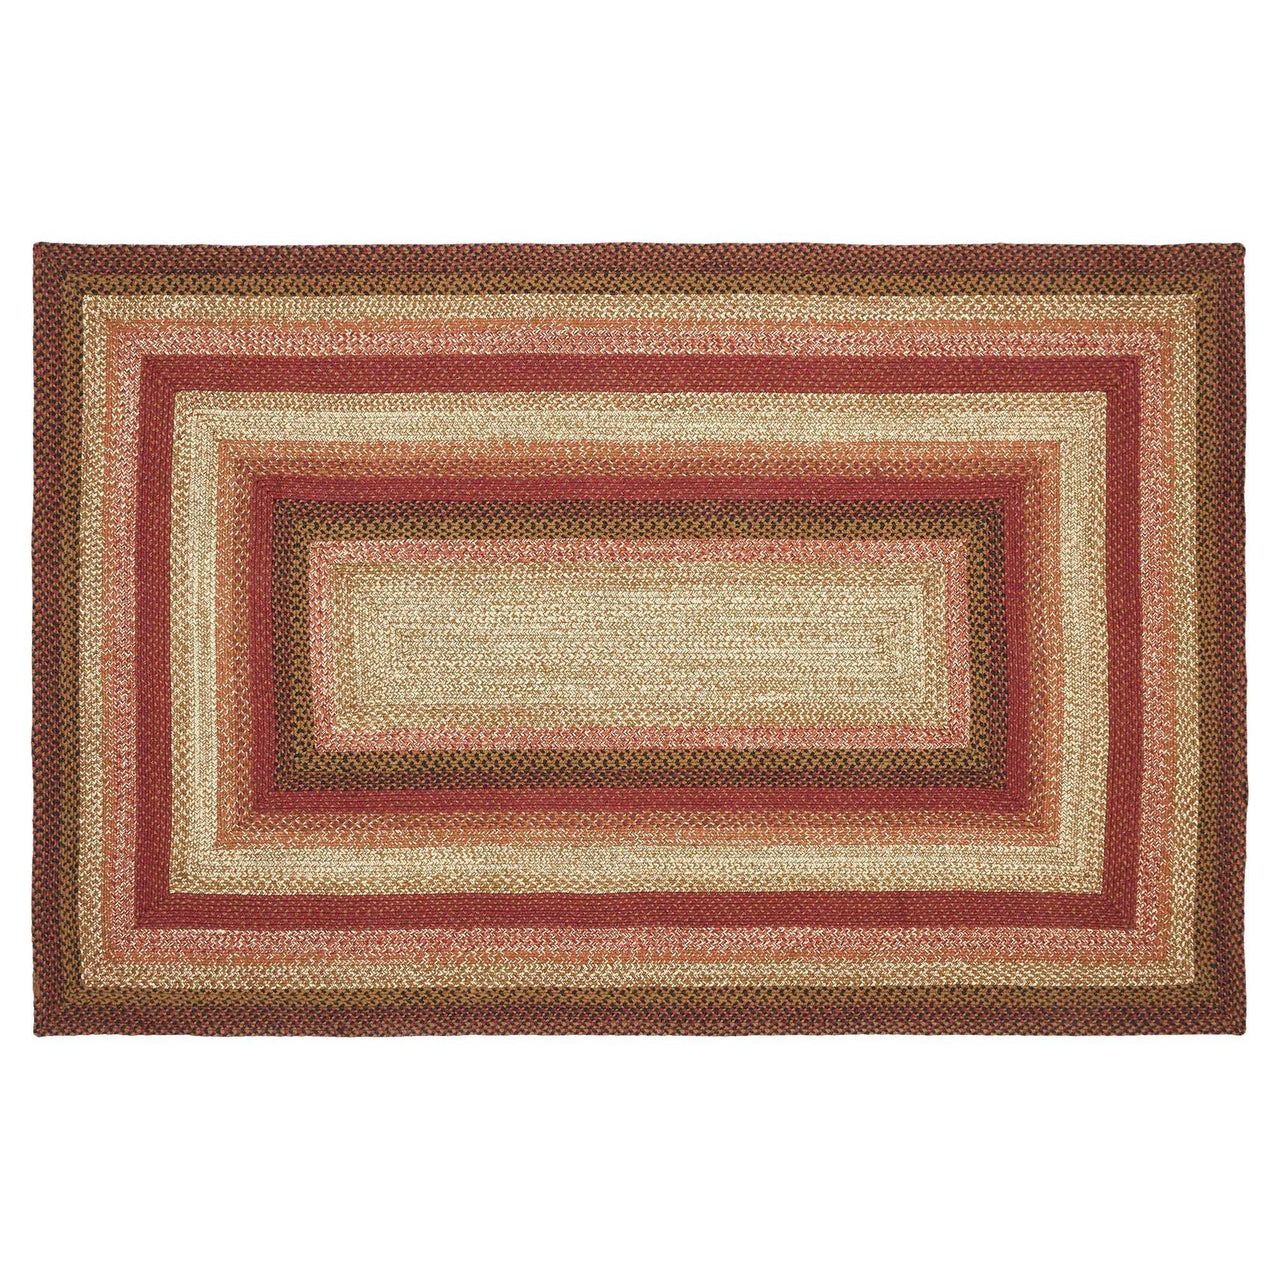 Ginger Spice Jute Braided Rug Rect with Rug Pad 5'x8' VHC Brands